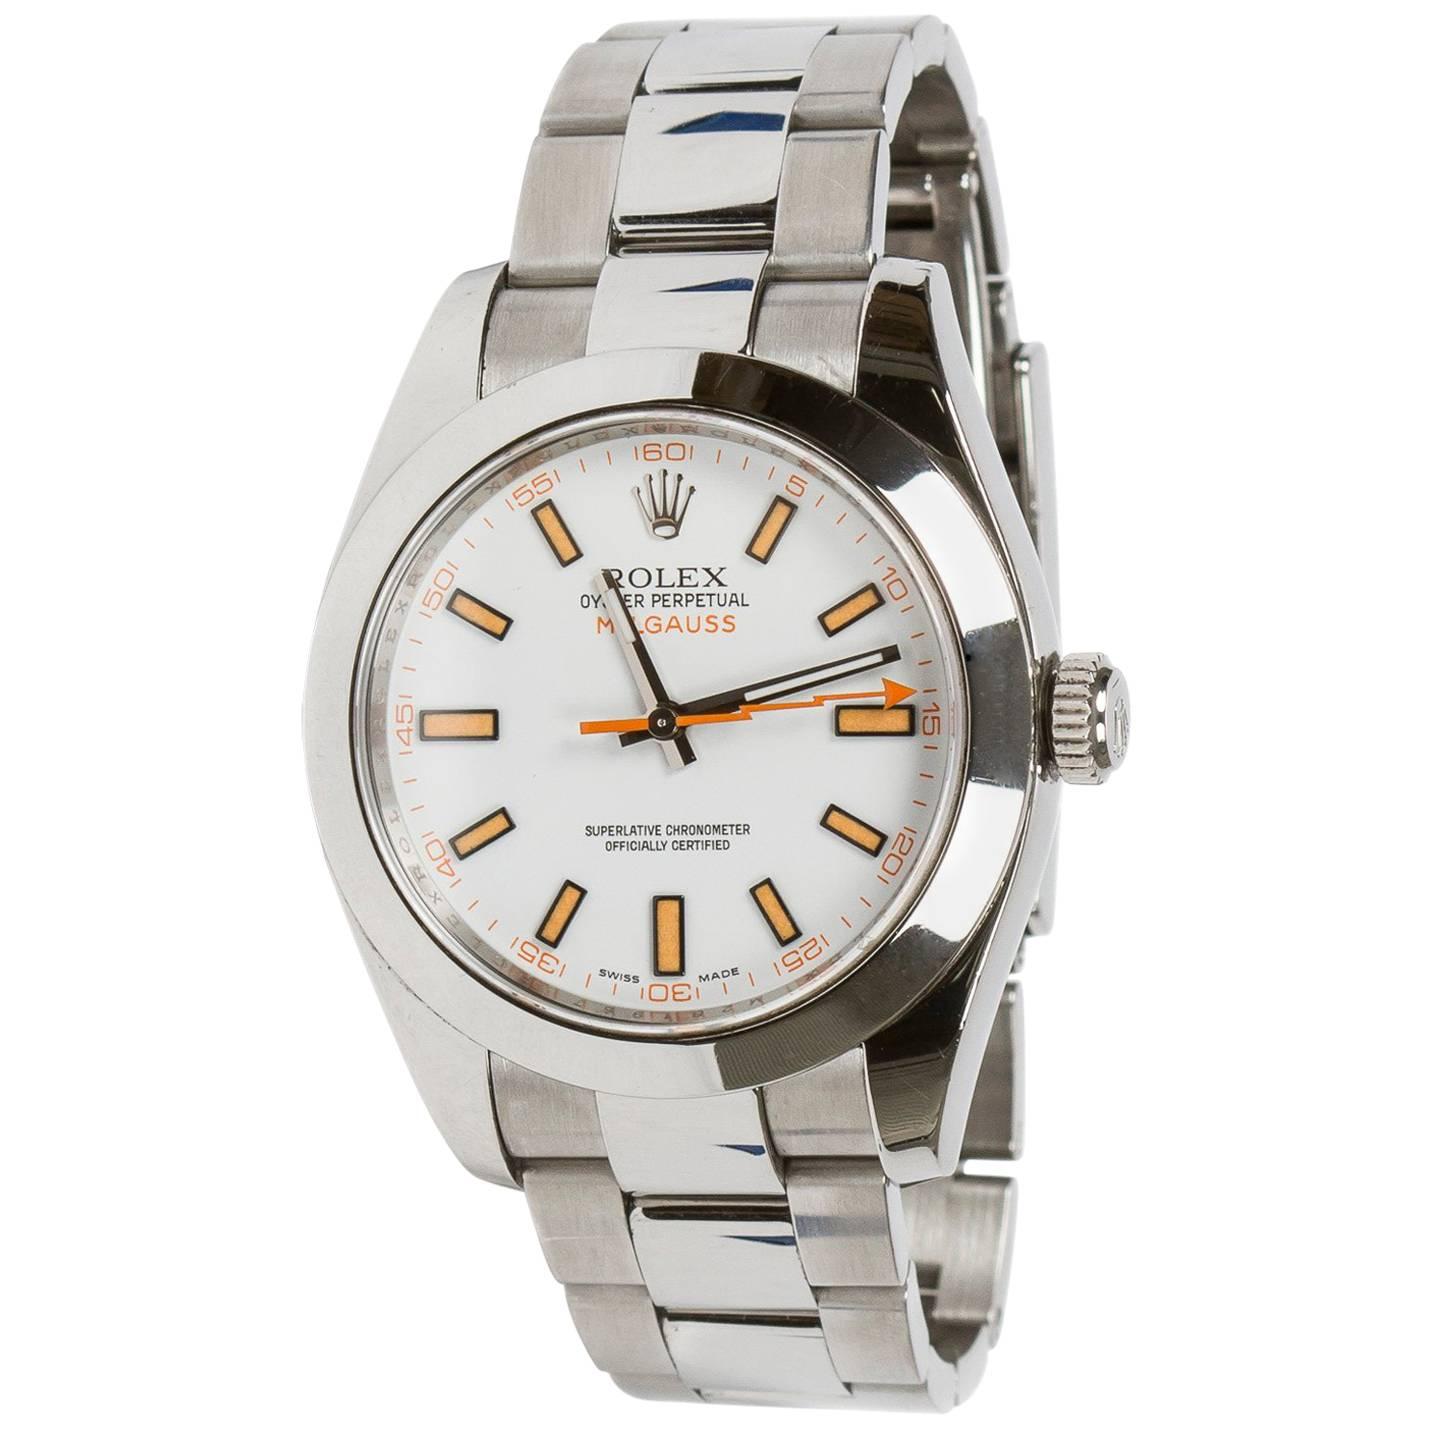 Rolex Stainless Steel White Dial Milgauss Oyster Perpetual Automatic Wristwatch For Sale